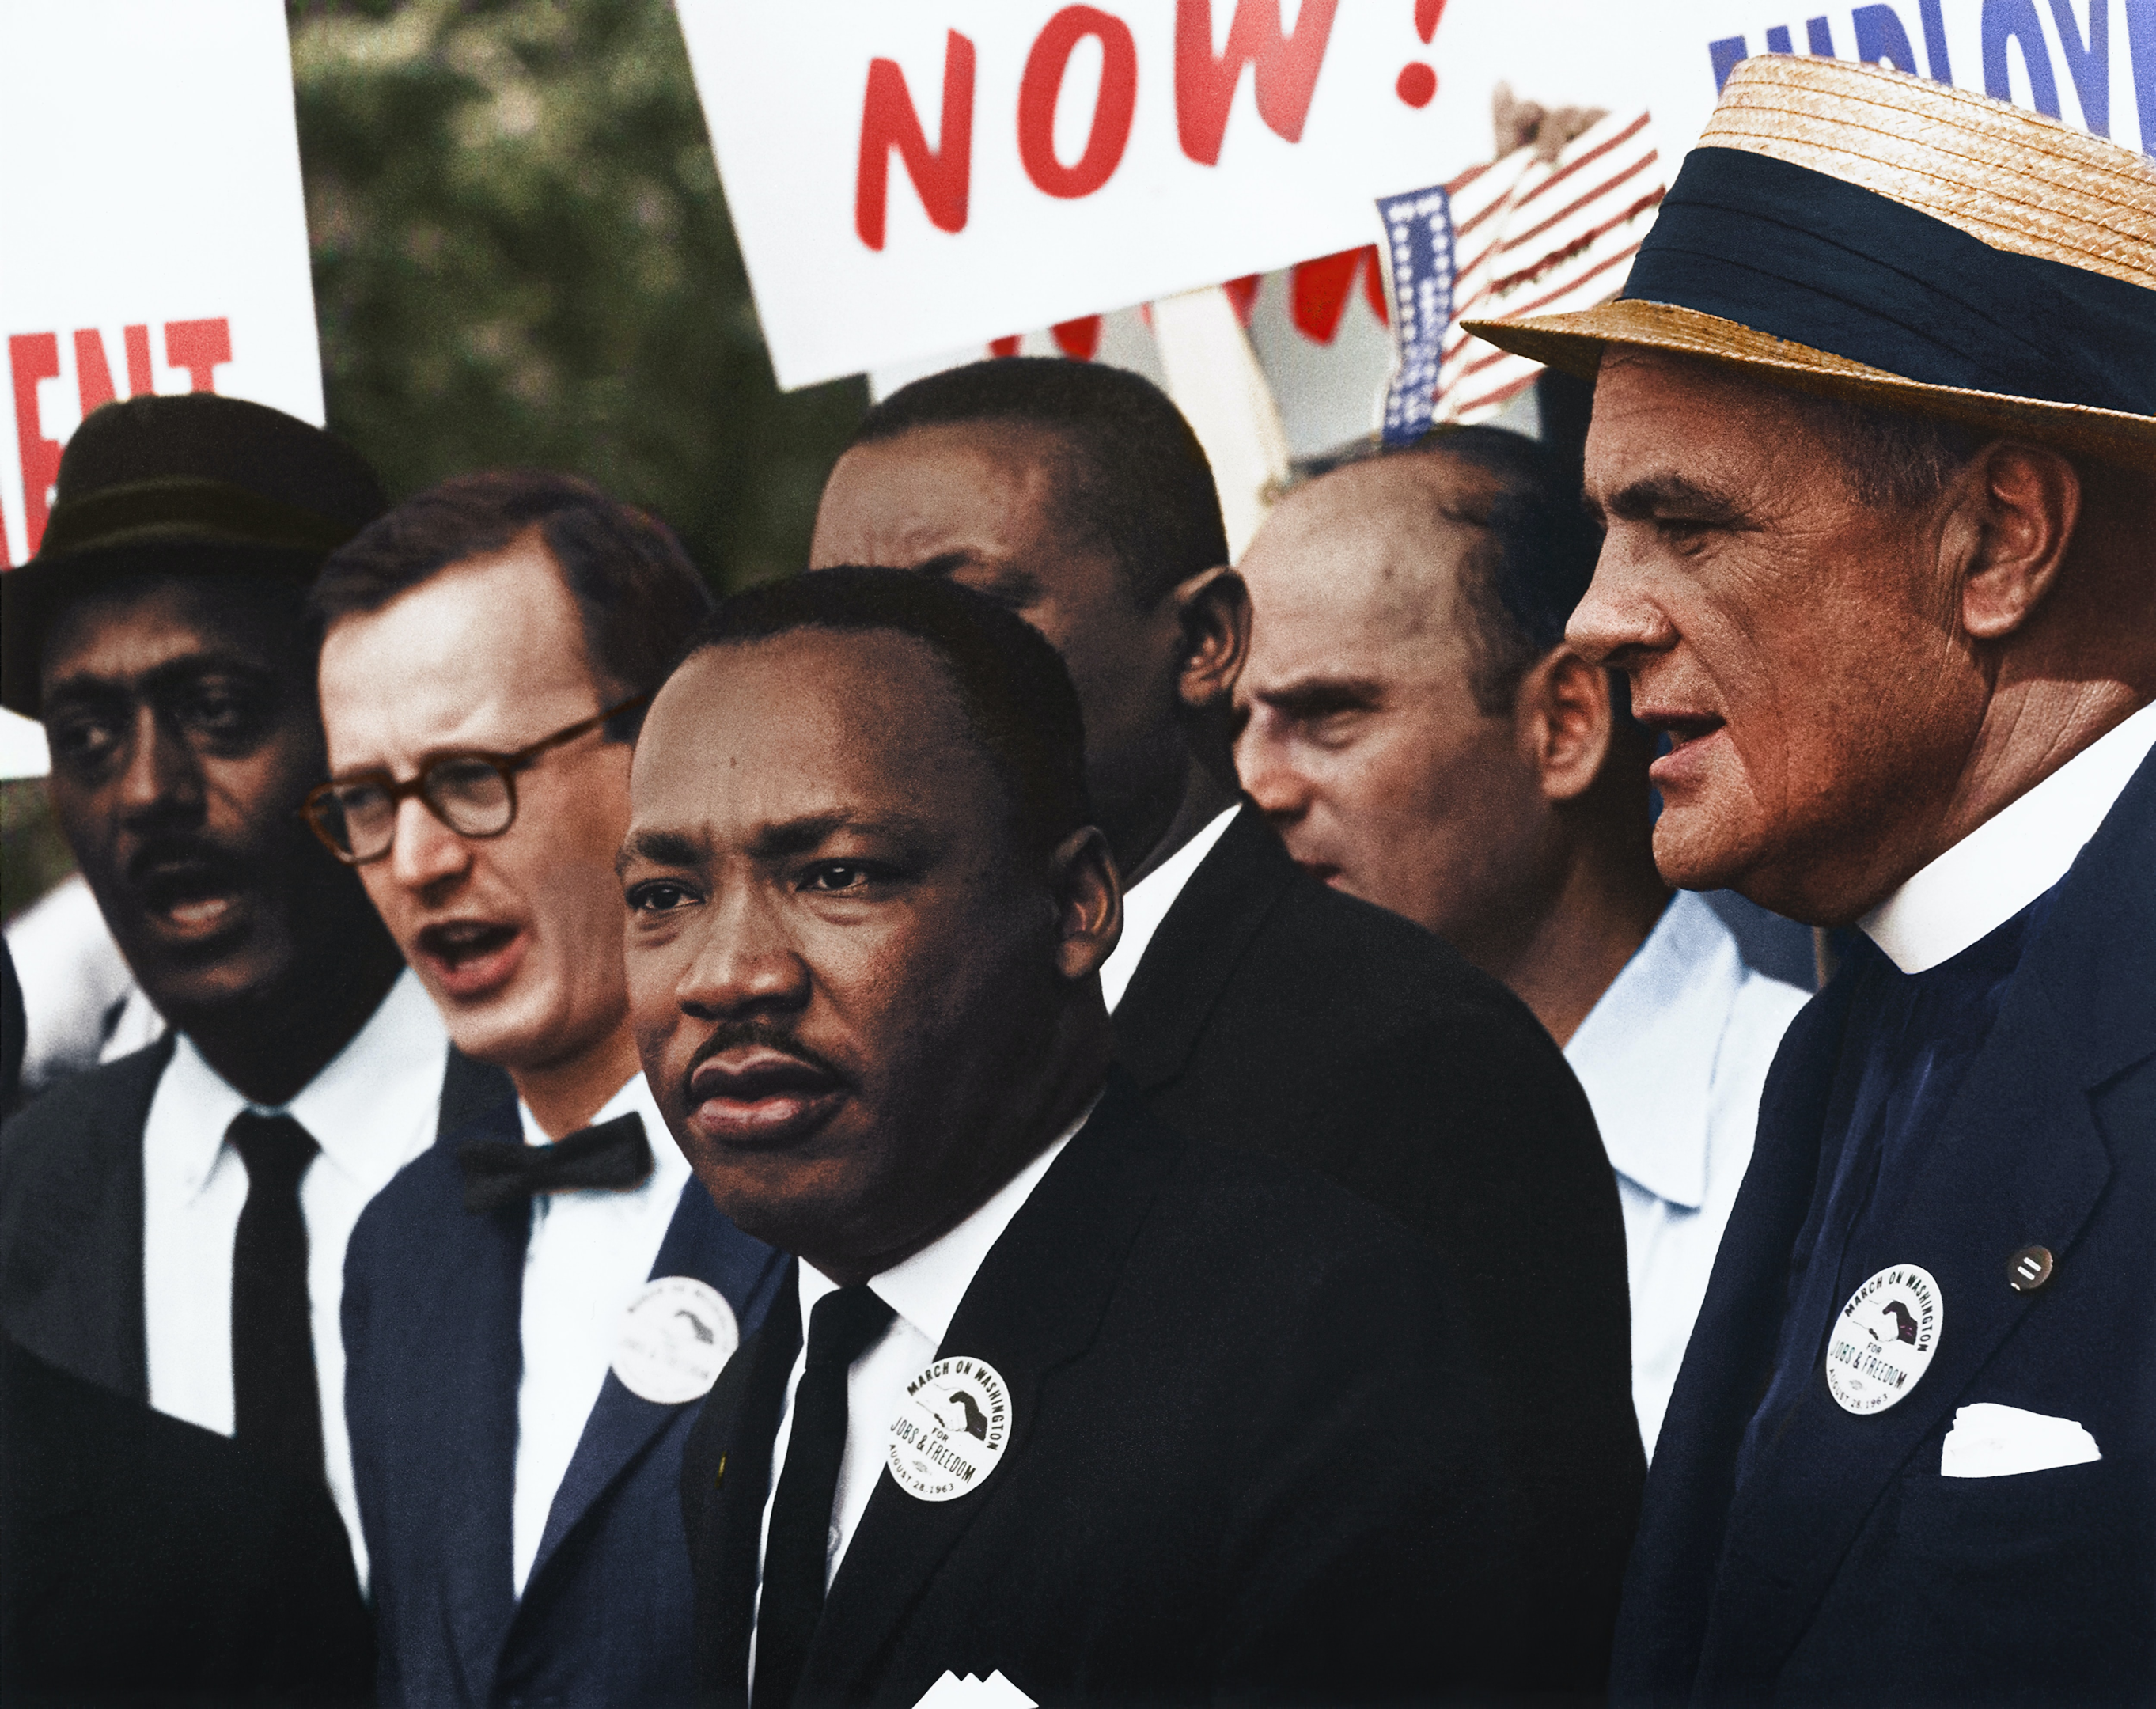 Martin Luther King Jr. – Champion of Freedom, Peace, and Greater Equality